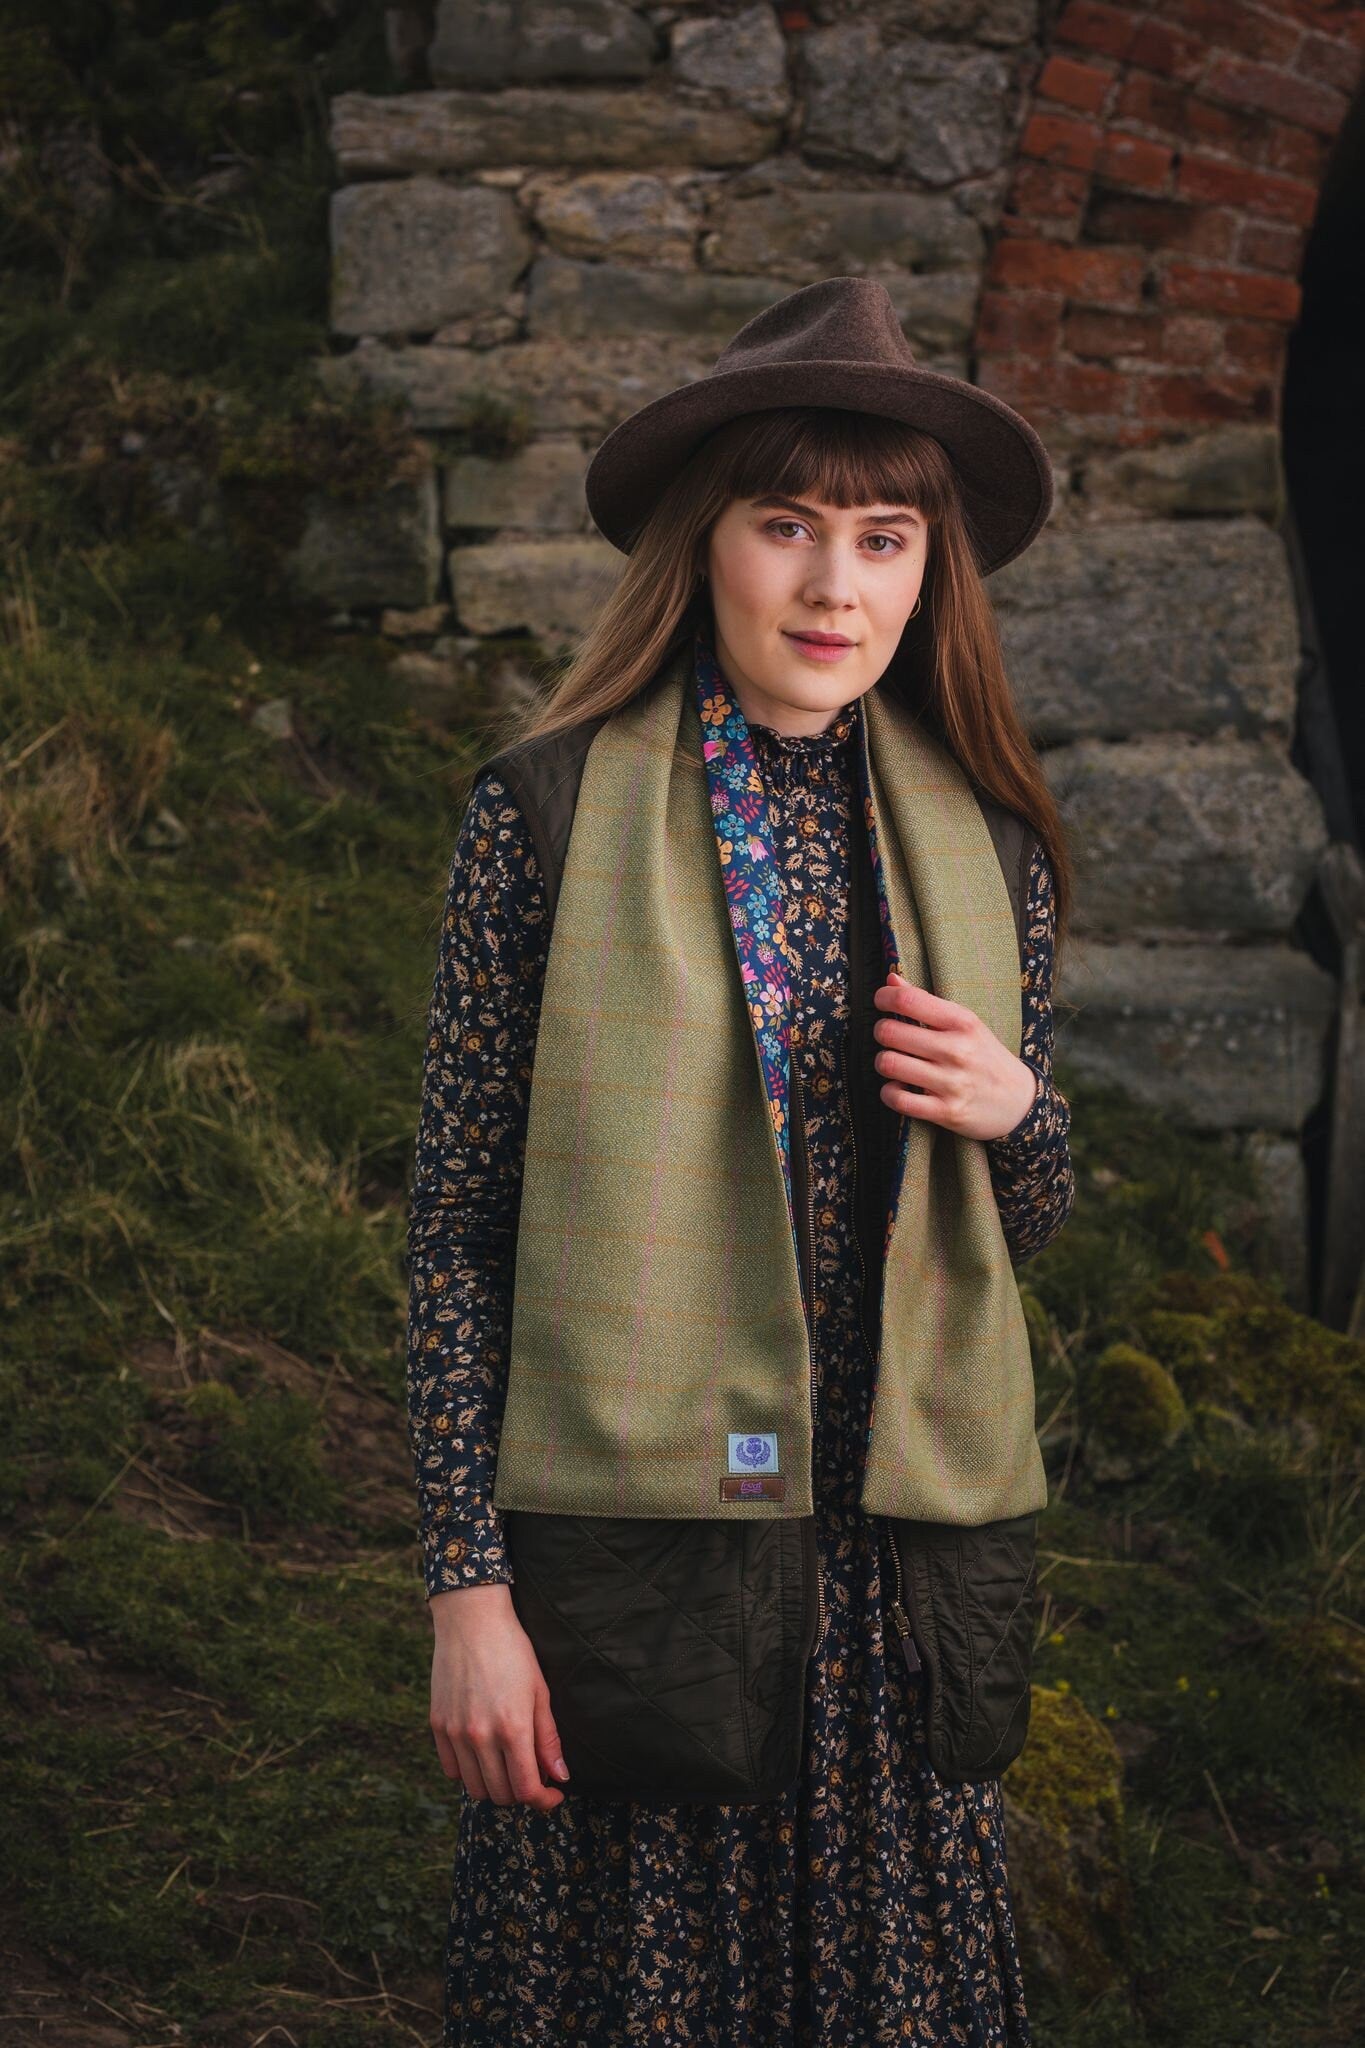 Pale Beige Lovat Tweed Long Scarf lined with Liberty Fabrics